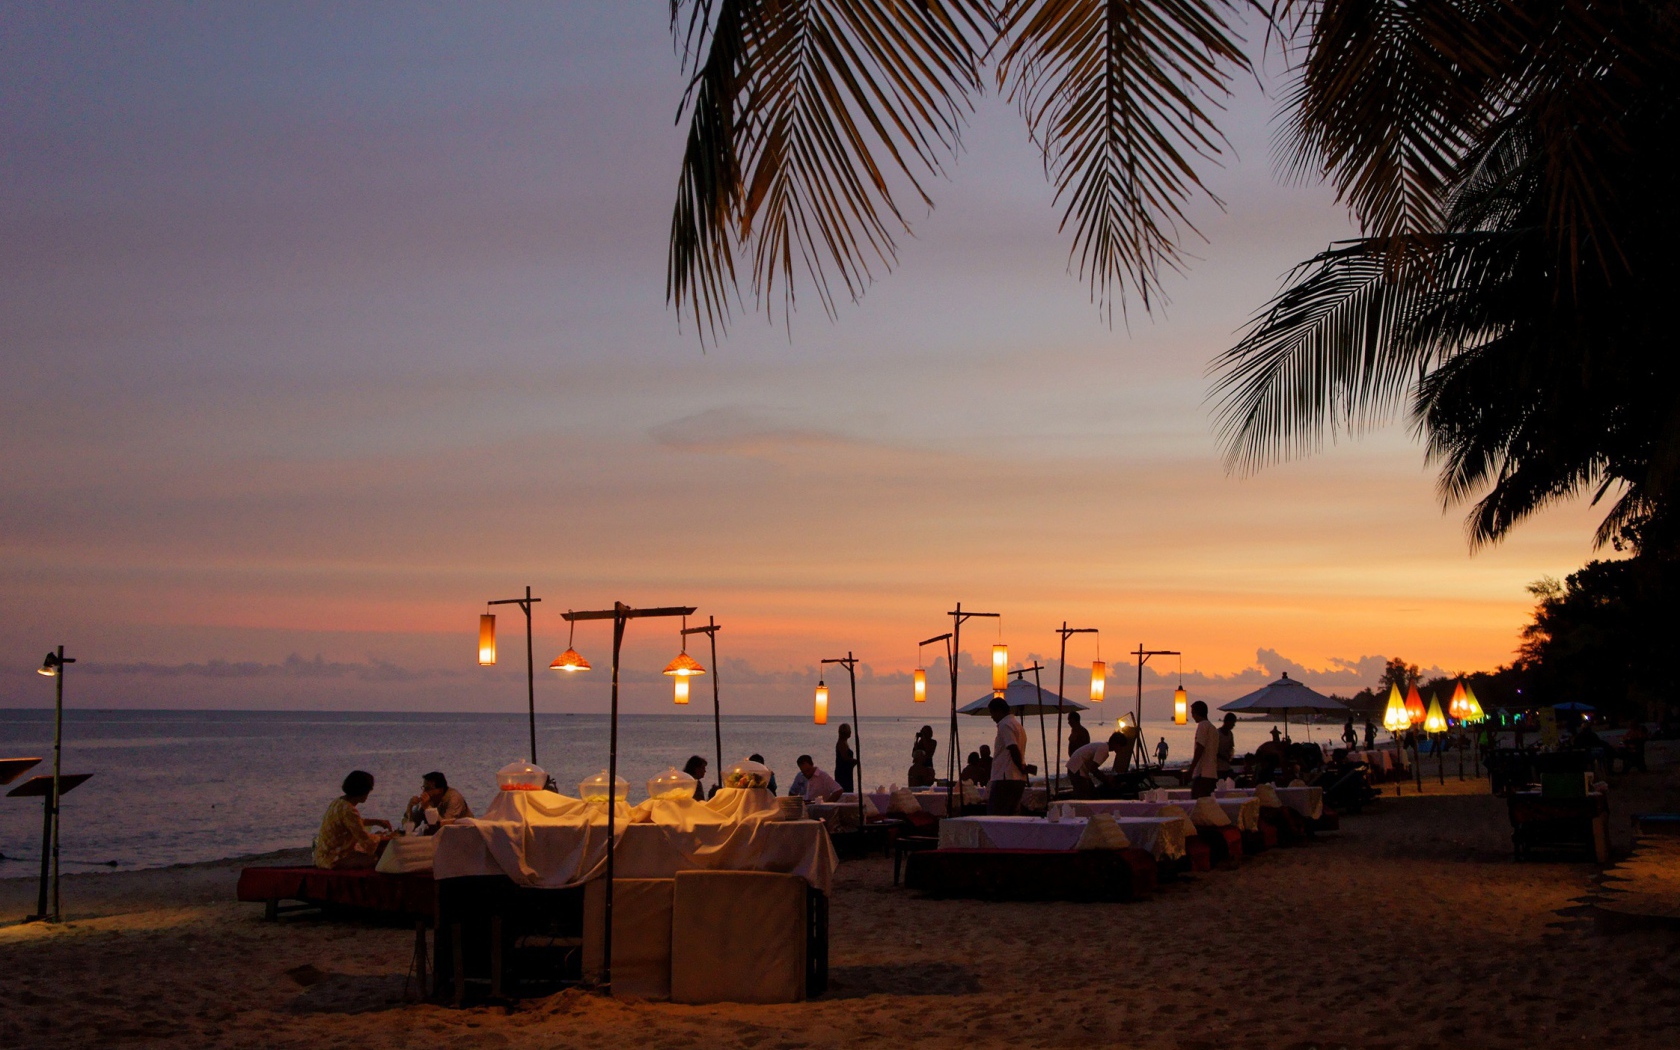 Relax on the beach in Koh Samui, Thailand